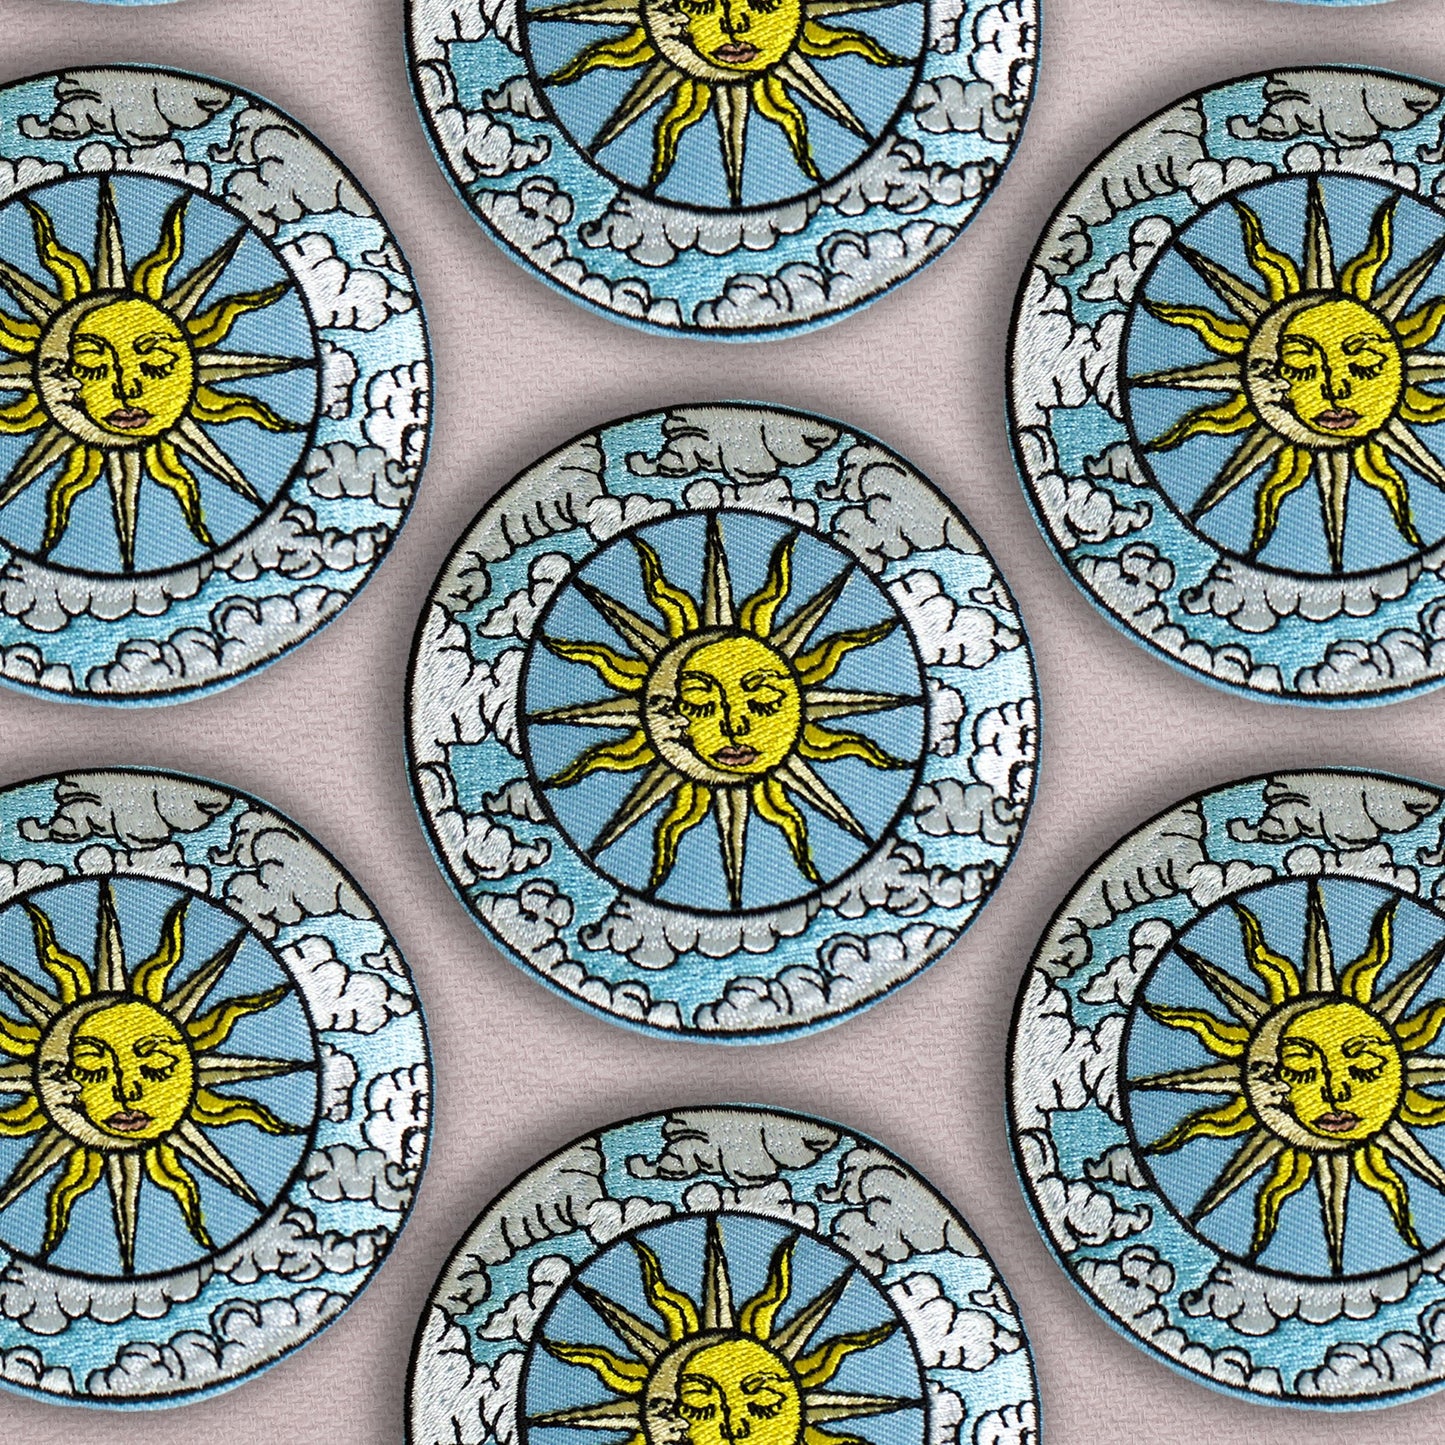 Sunshine Medallion - Embroidered Iron On Patch - Muse + Moonstone